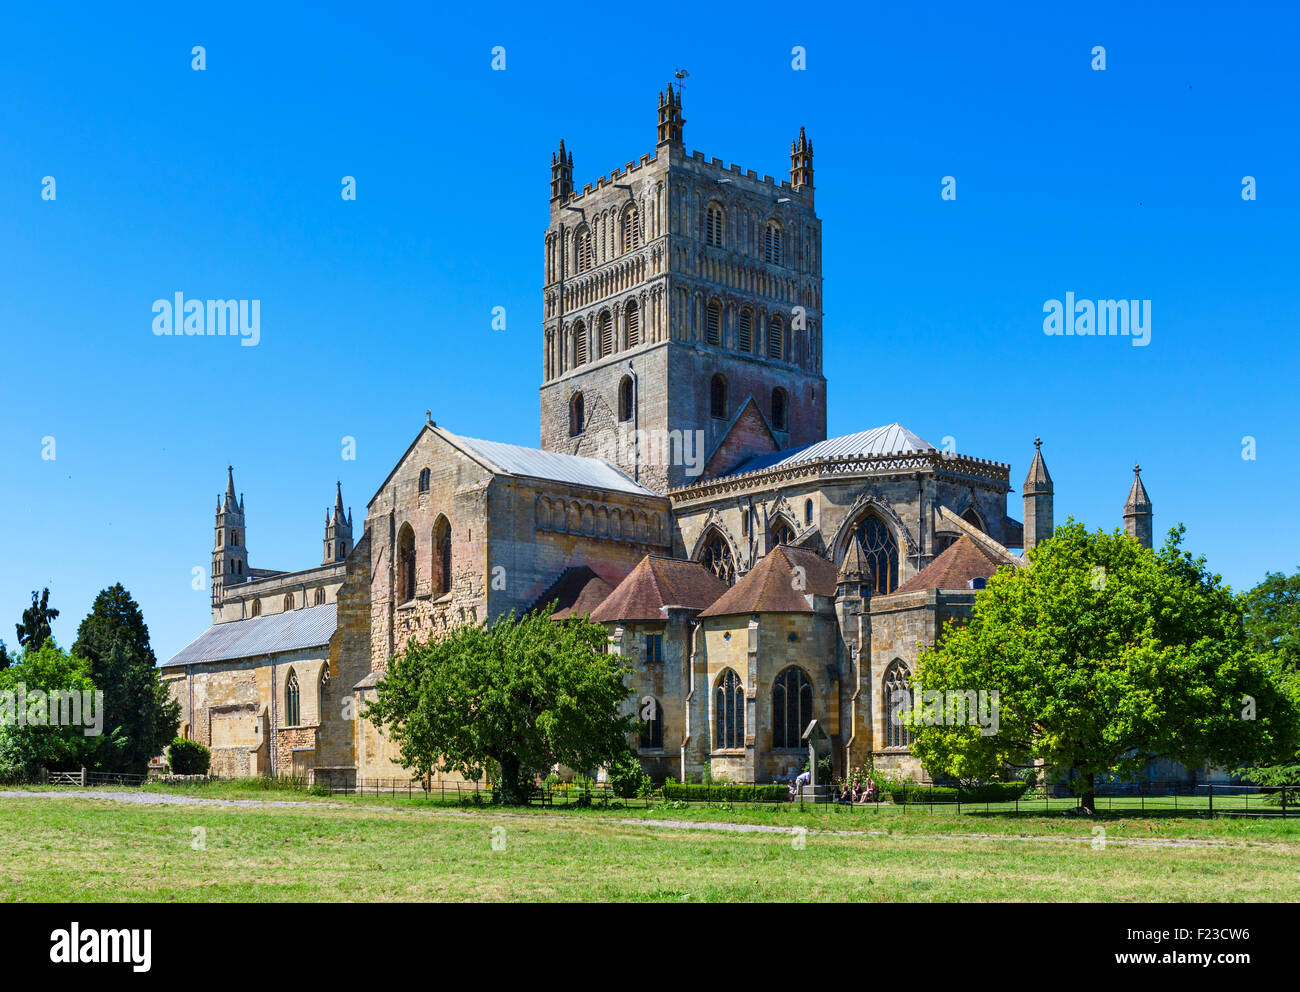 Tewkesbury Abbey or the Abbey Church of St Mary the Virgin, Tewkesbury, Gloucestershire, England, UK Stock Photo